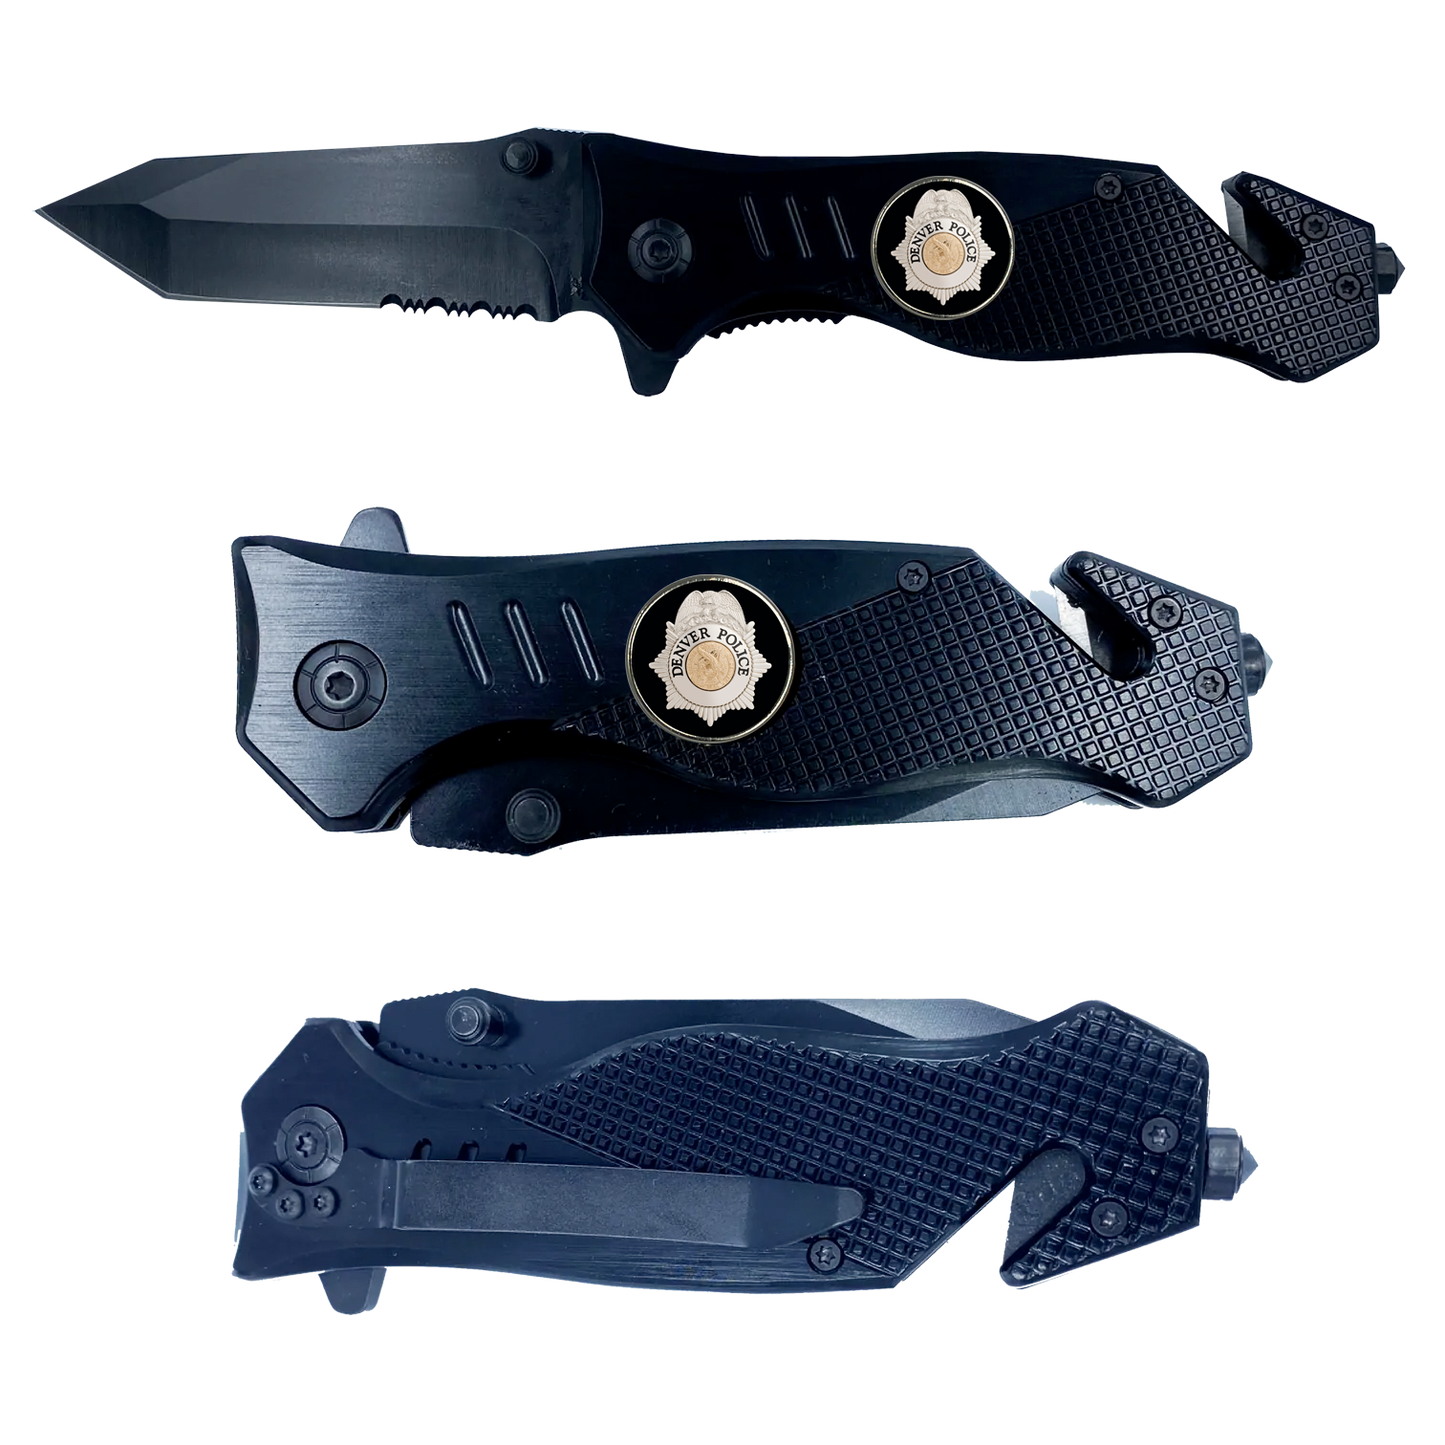 Denver Colorado Police 3-in-1 Tactical Rescue knife tool with Seatbelt Cutter, Steel Serrated Blade, Glass